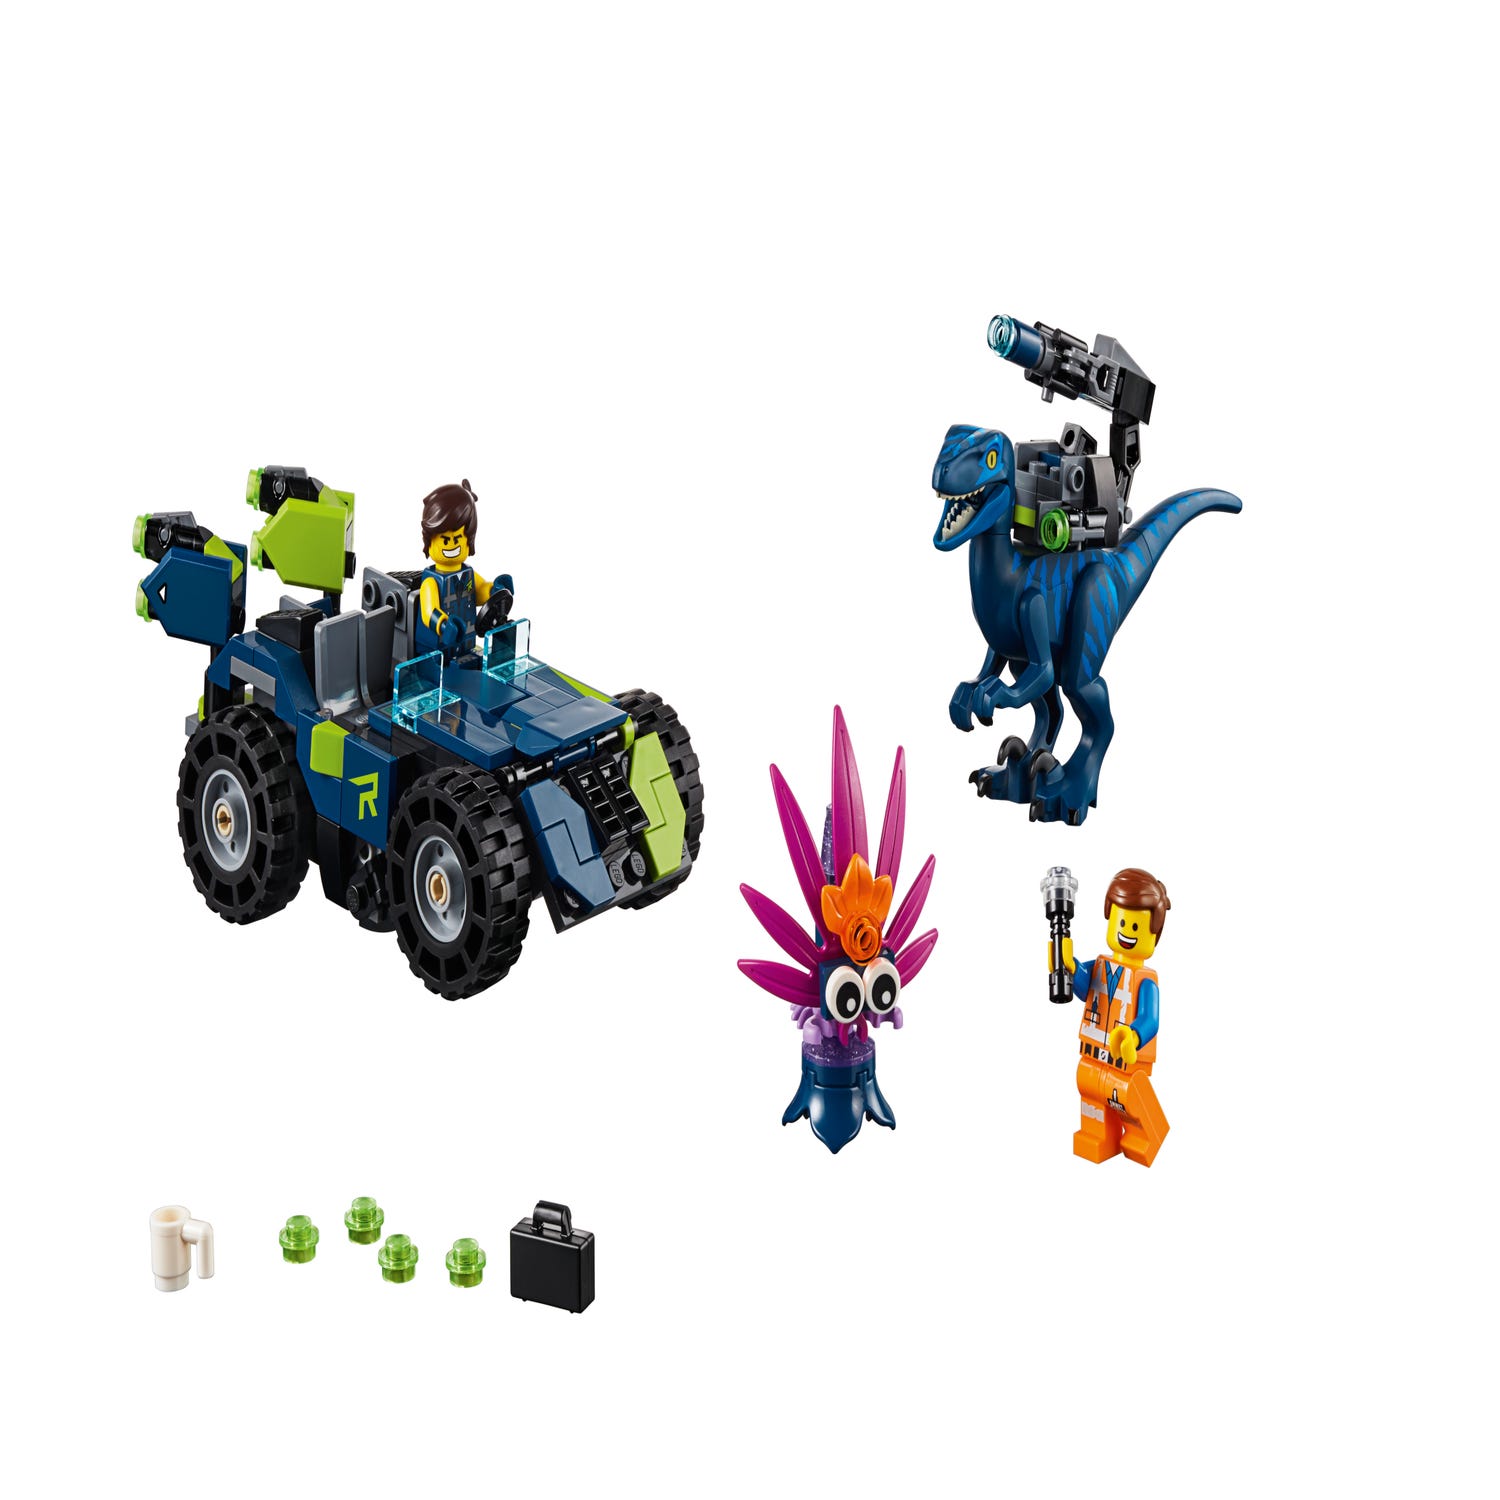 Rex's Offroader! 70826 | THE LEGO® MOVIE 2™ | Buy online at the Official LEGO® Shop US